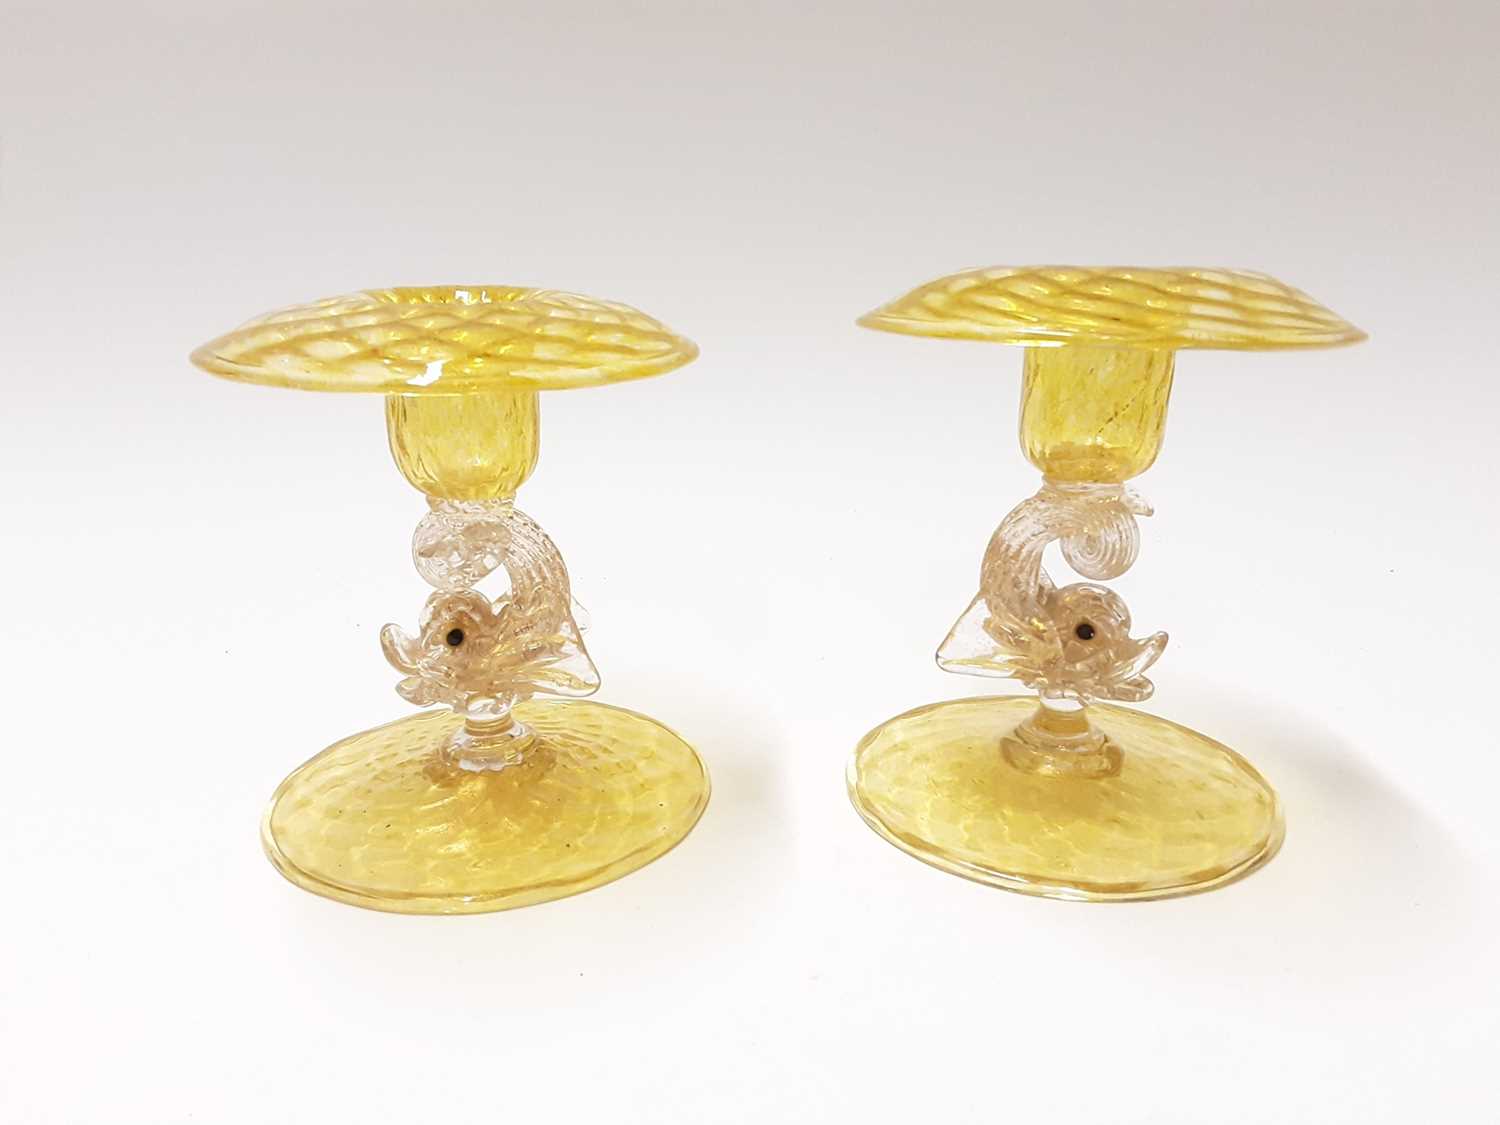 Lot 213 - Two good quality Murano Venitian yellow glass dolphin candlesticks